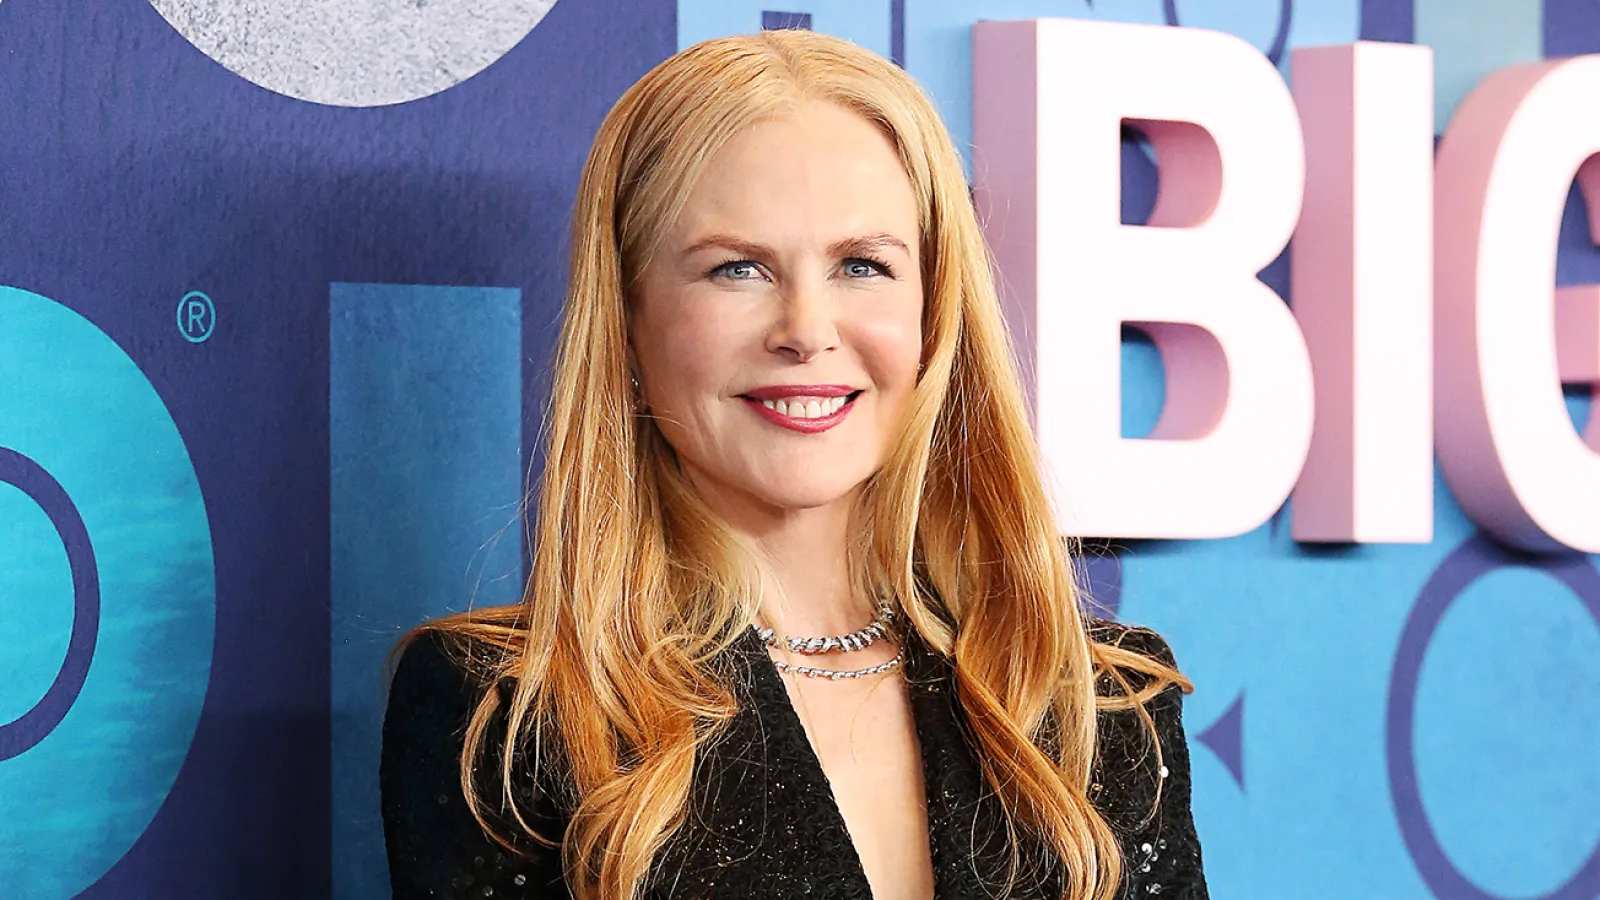 Kidman and Witherspoon Gear Up for 'Big Little Lies' Season 3 Talks